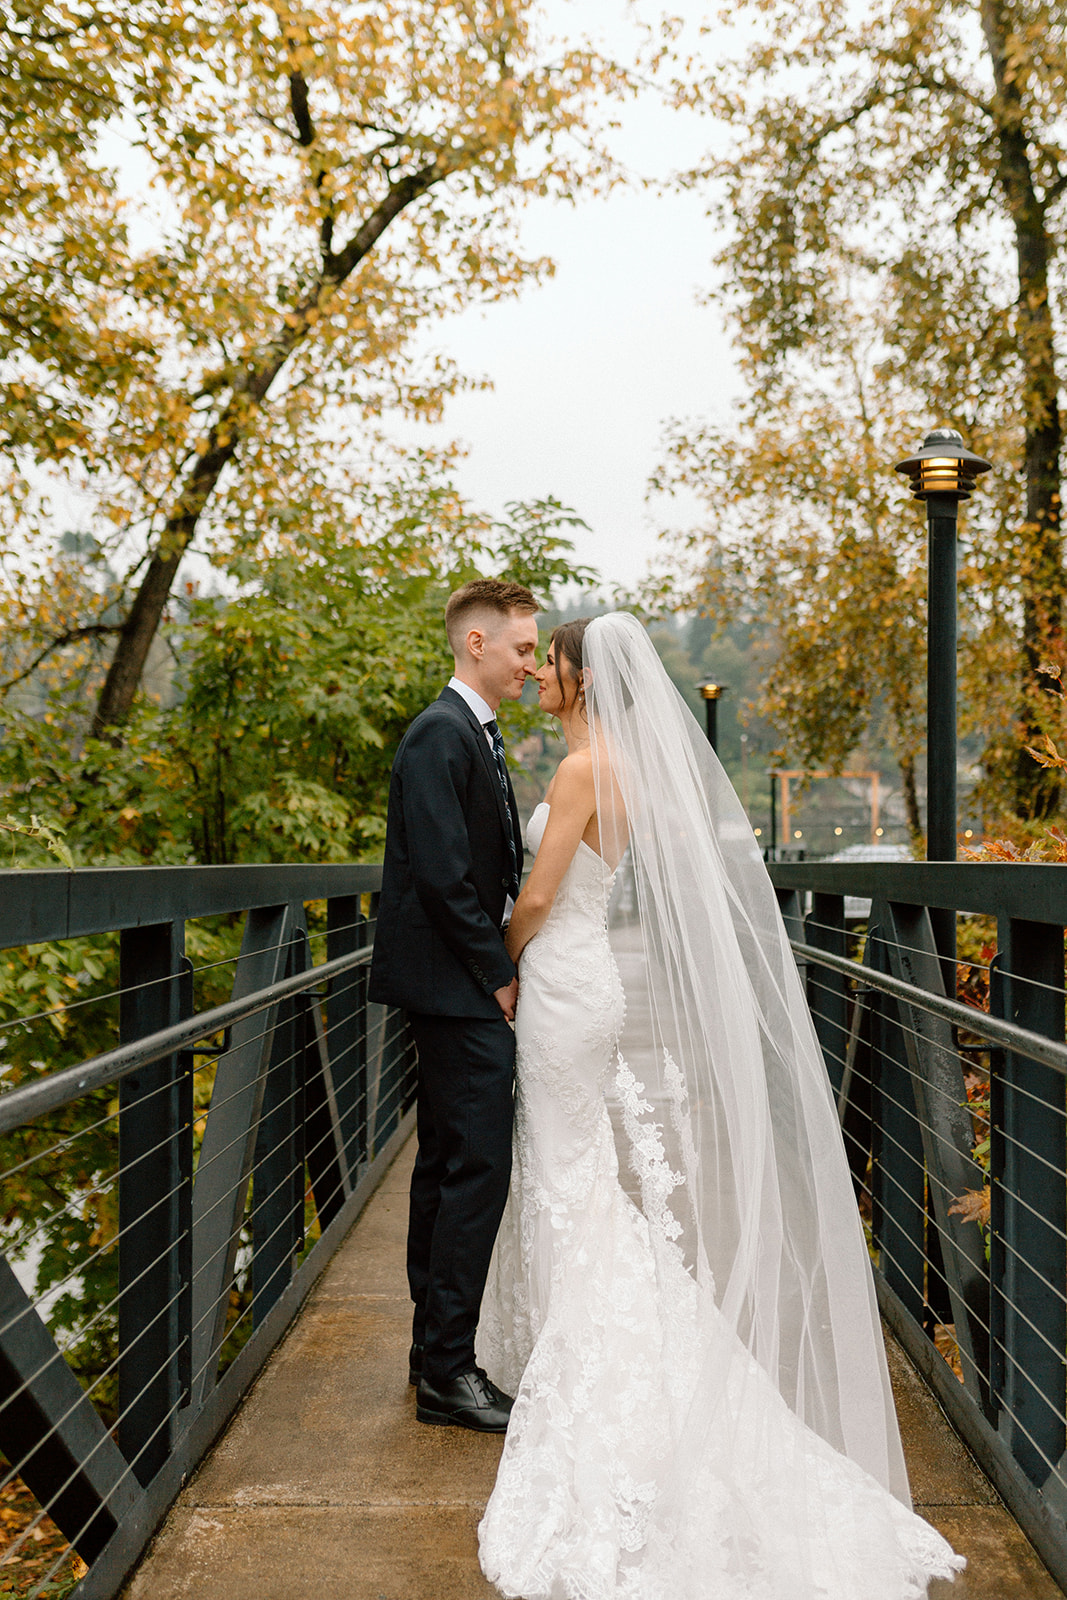 Bride and groom pictures captured by PWN Wedding Photographer